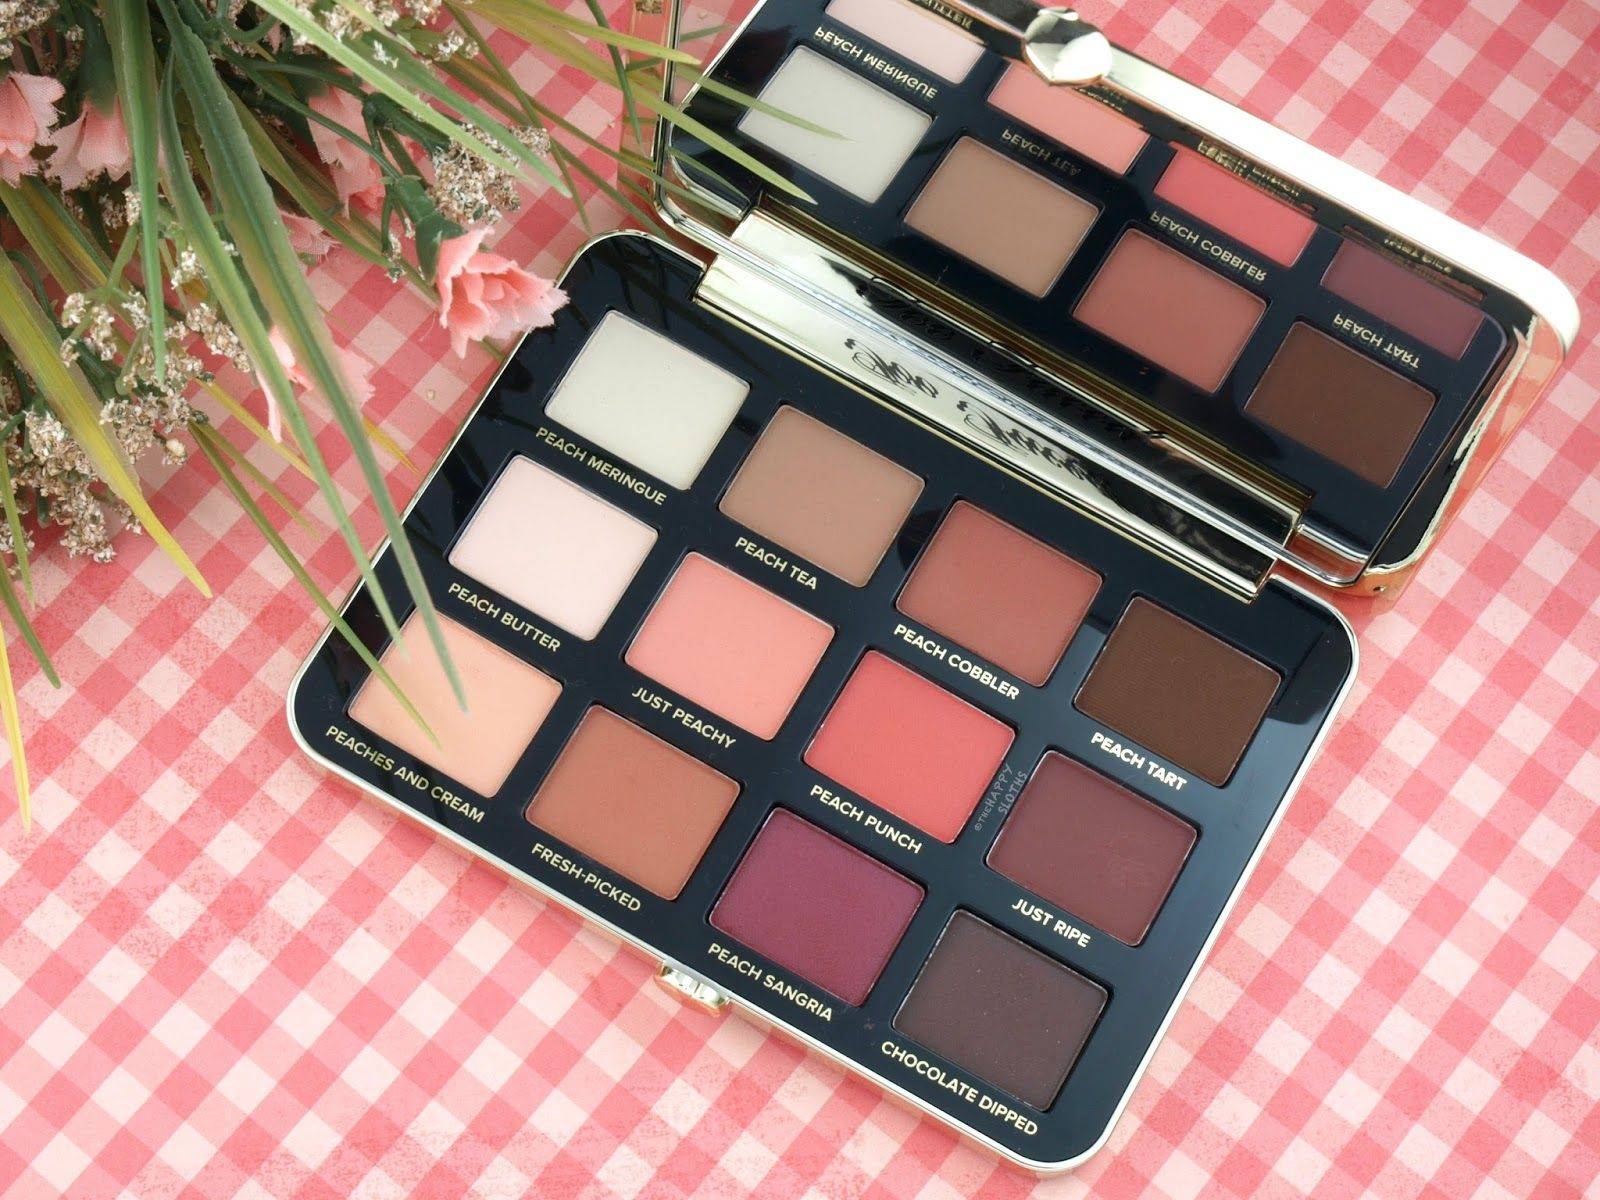 Too faced just peachy mattes palette - cruelty free makeup